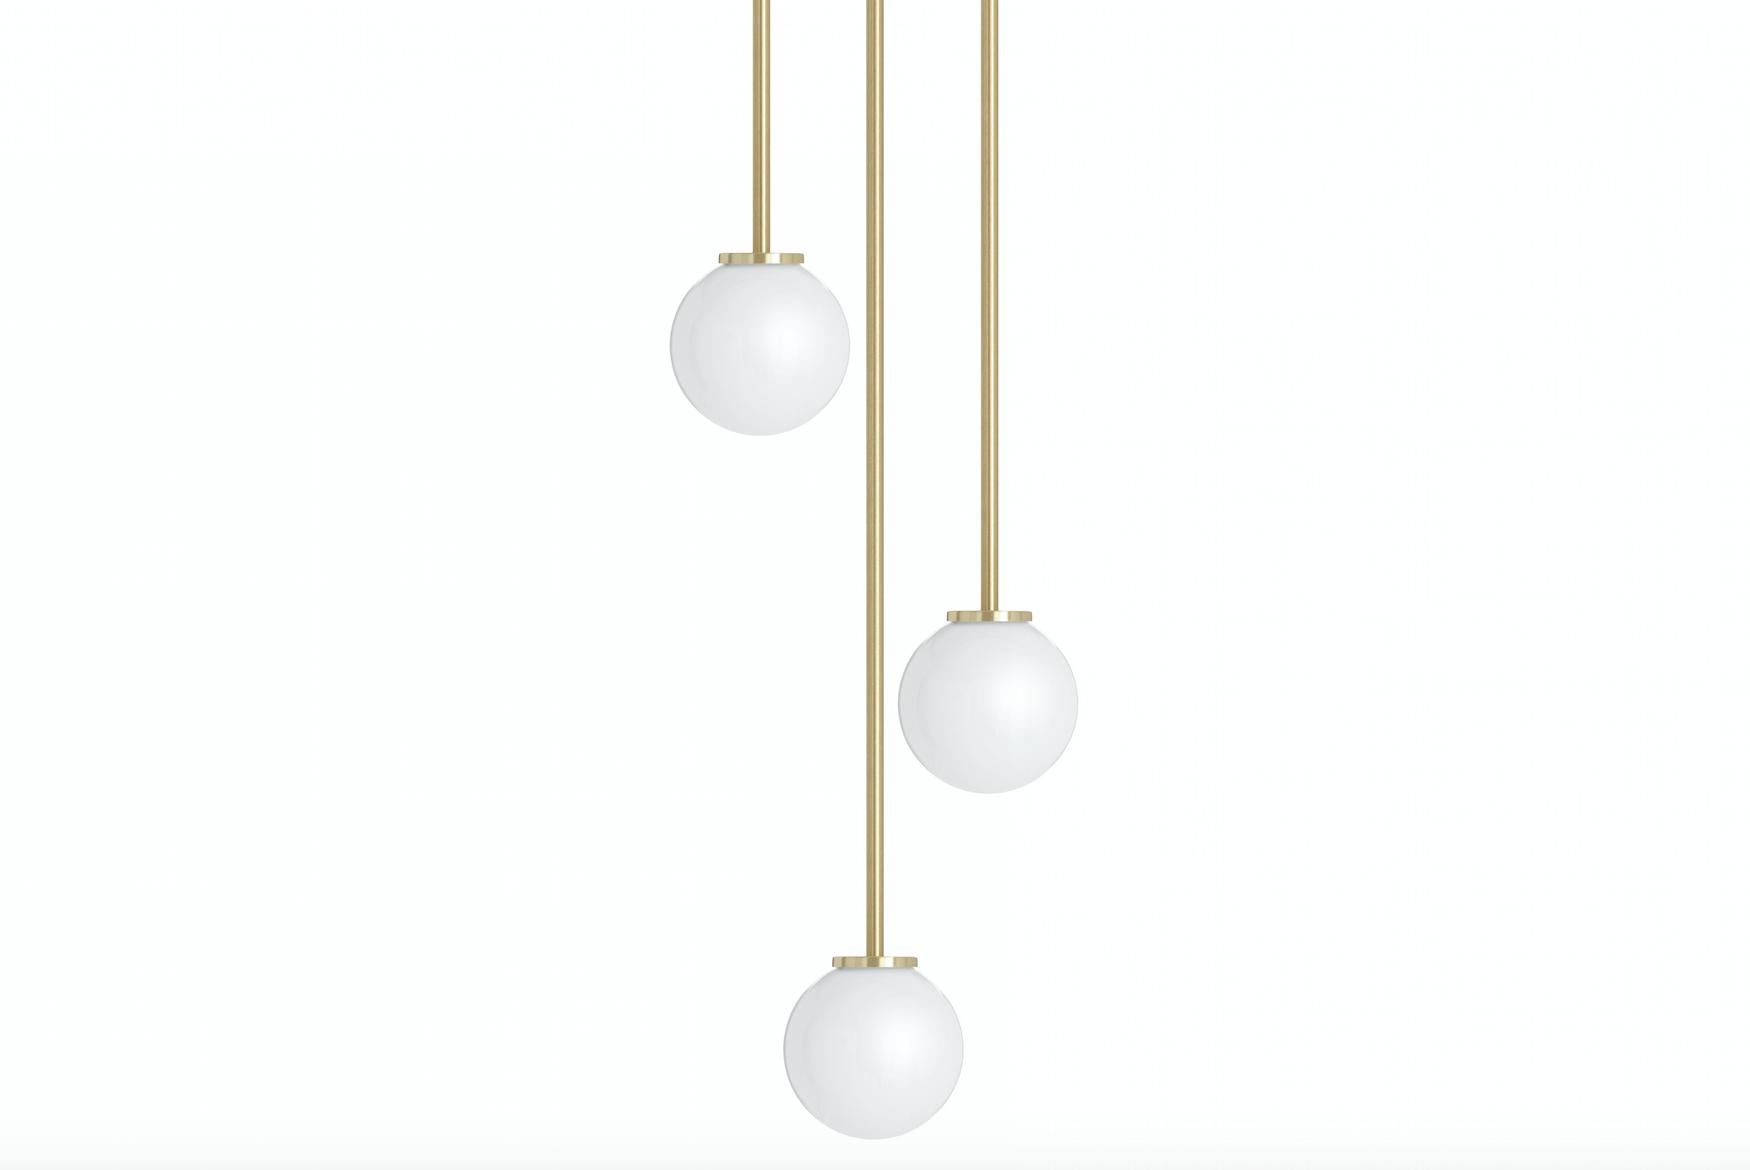 Mezzo cluster round by CTO Lighting
Materials: satin brass with opal glass shade 
Dimensions: H 15 x W 12 cm (pendant), overall to be specified

All our lamps can be wired according to each country. If sold to the USA it will be wired for the USA